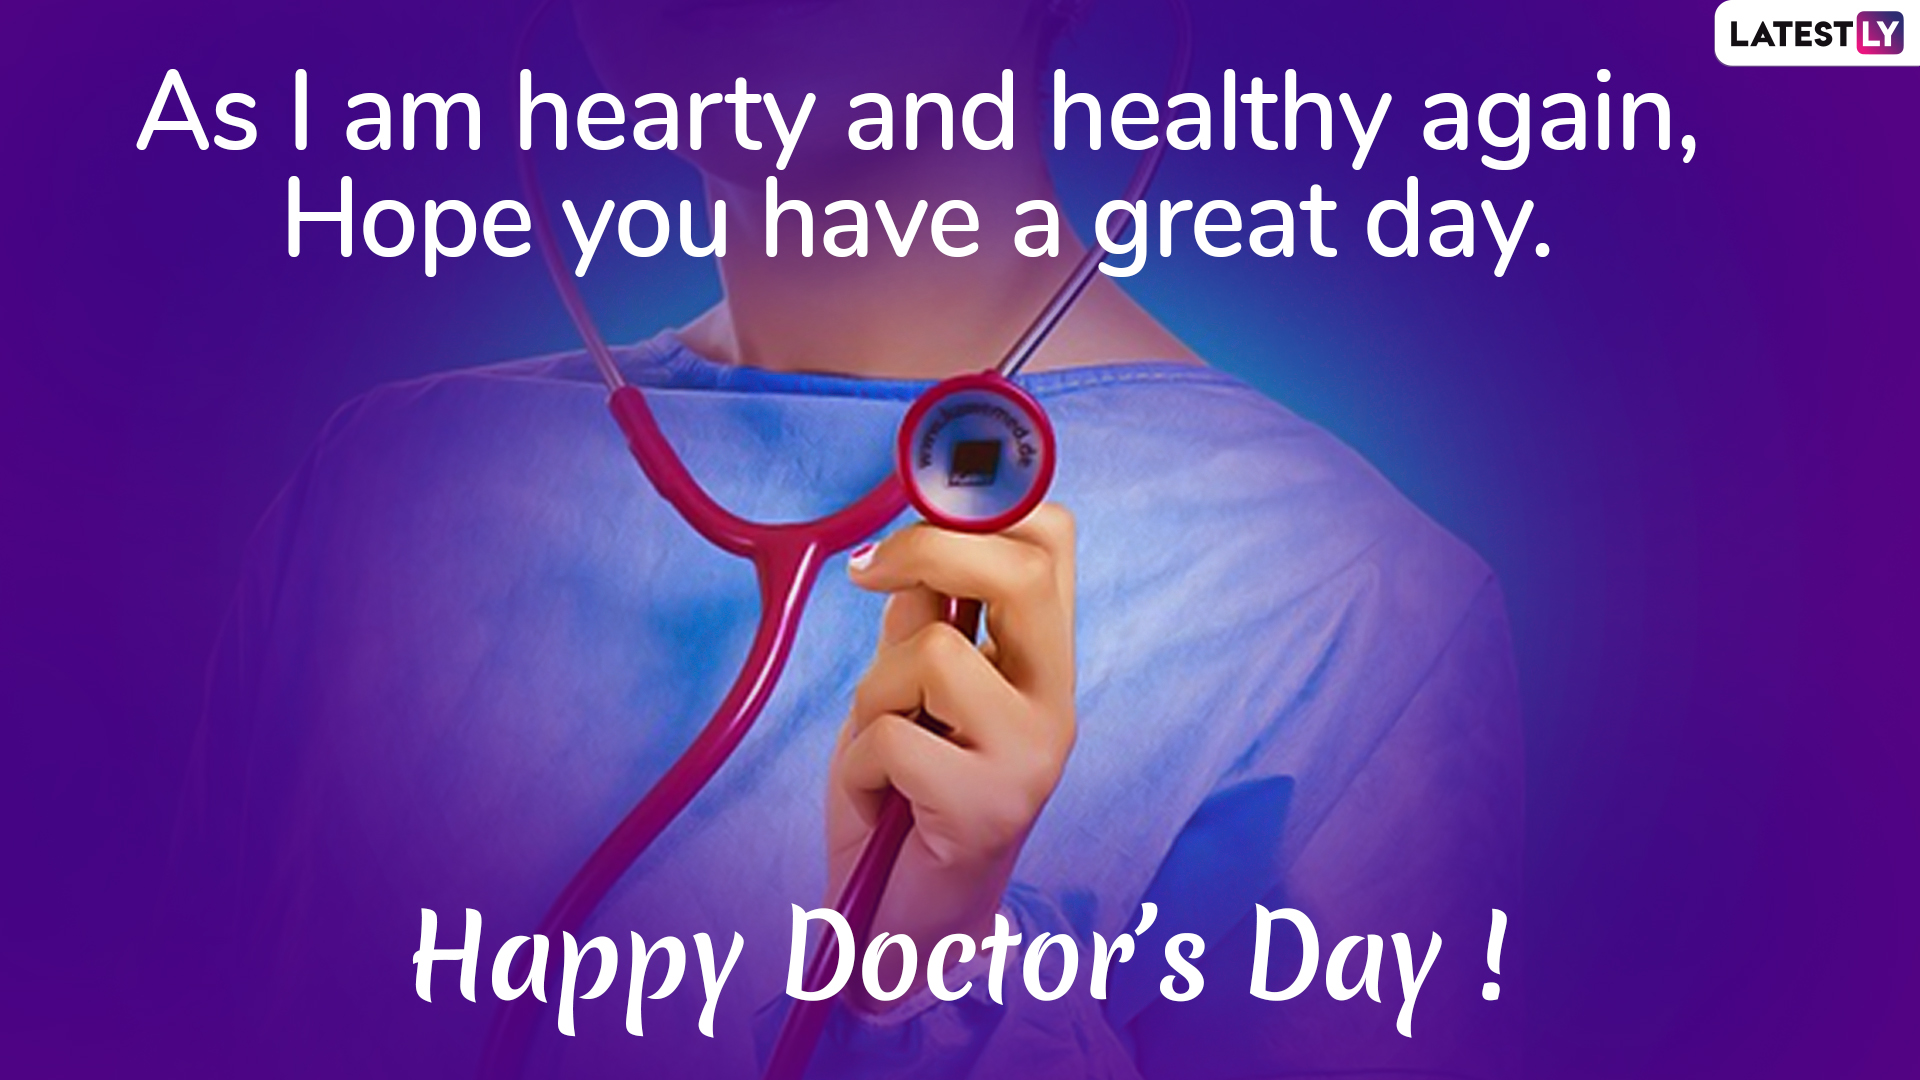 Doctor’s Day Images, Quotes and Greeting Cards for Free Download Online ...